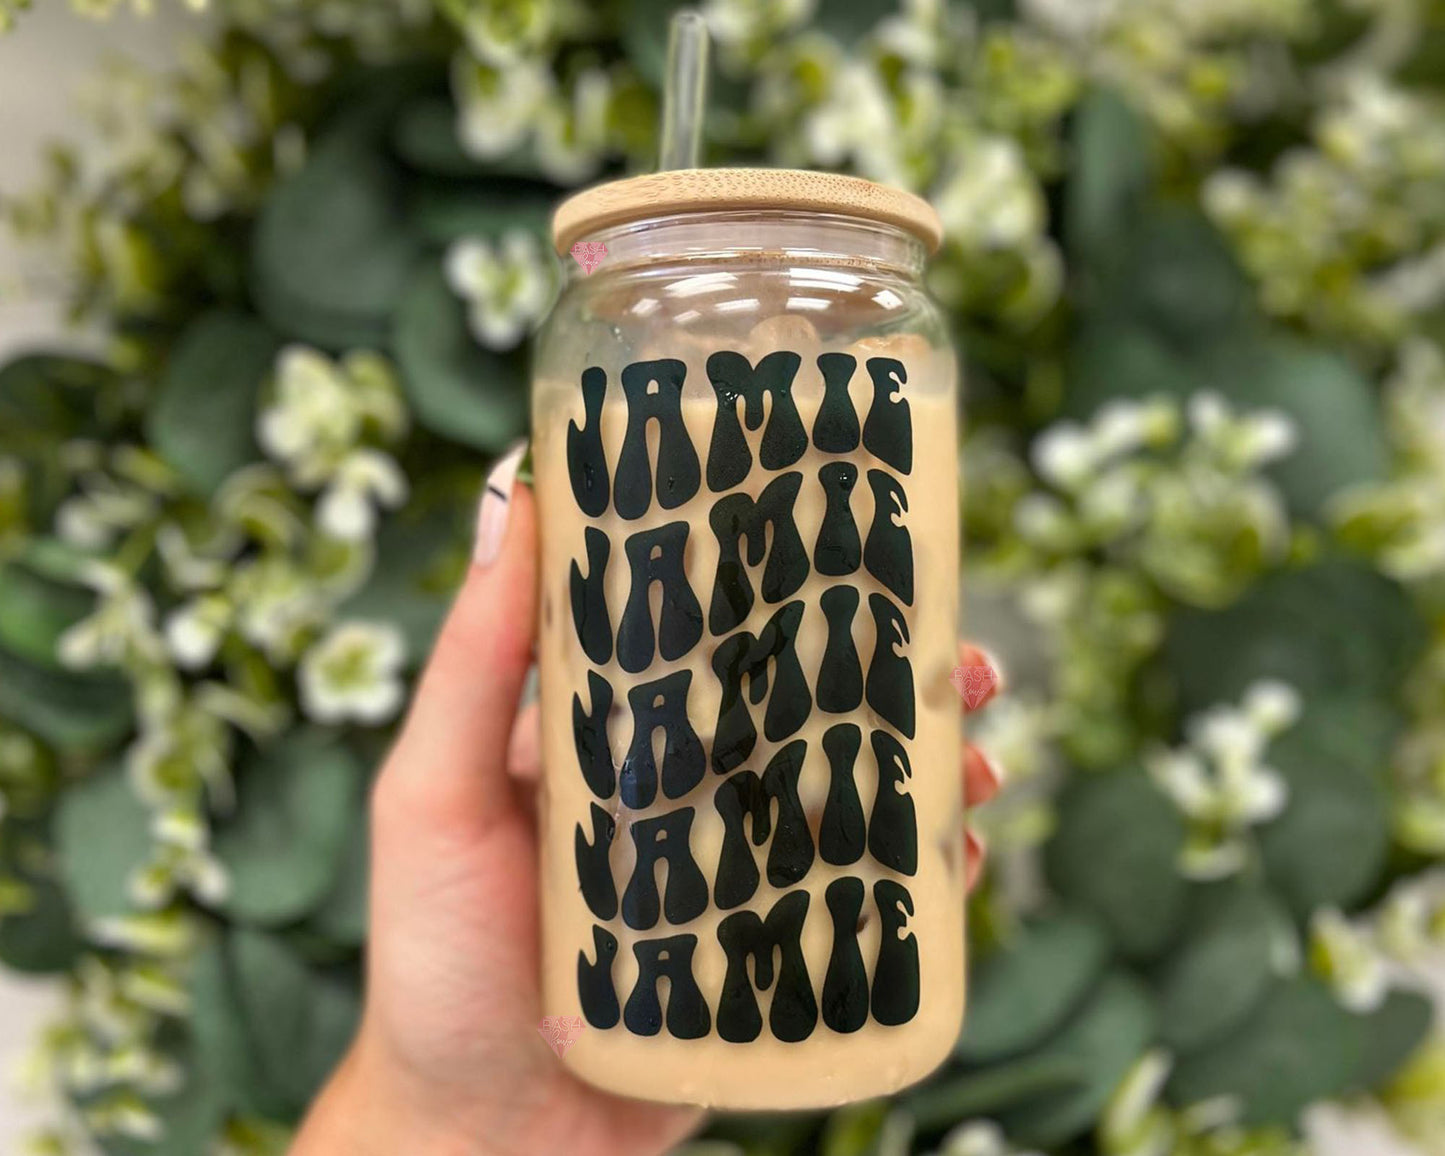 Bride Iced Coffee Cup